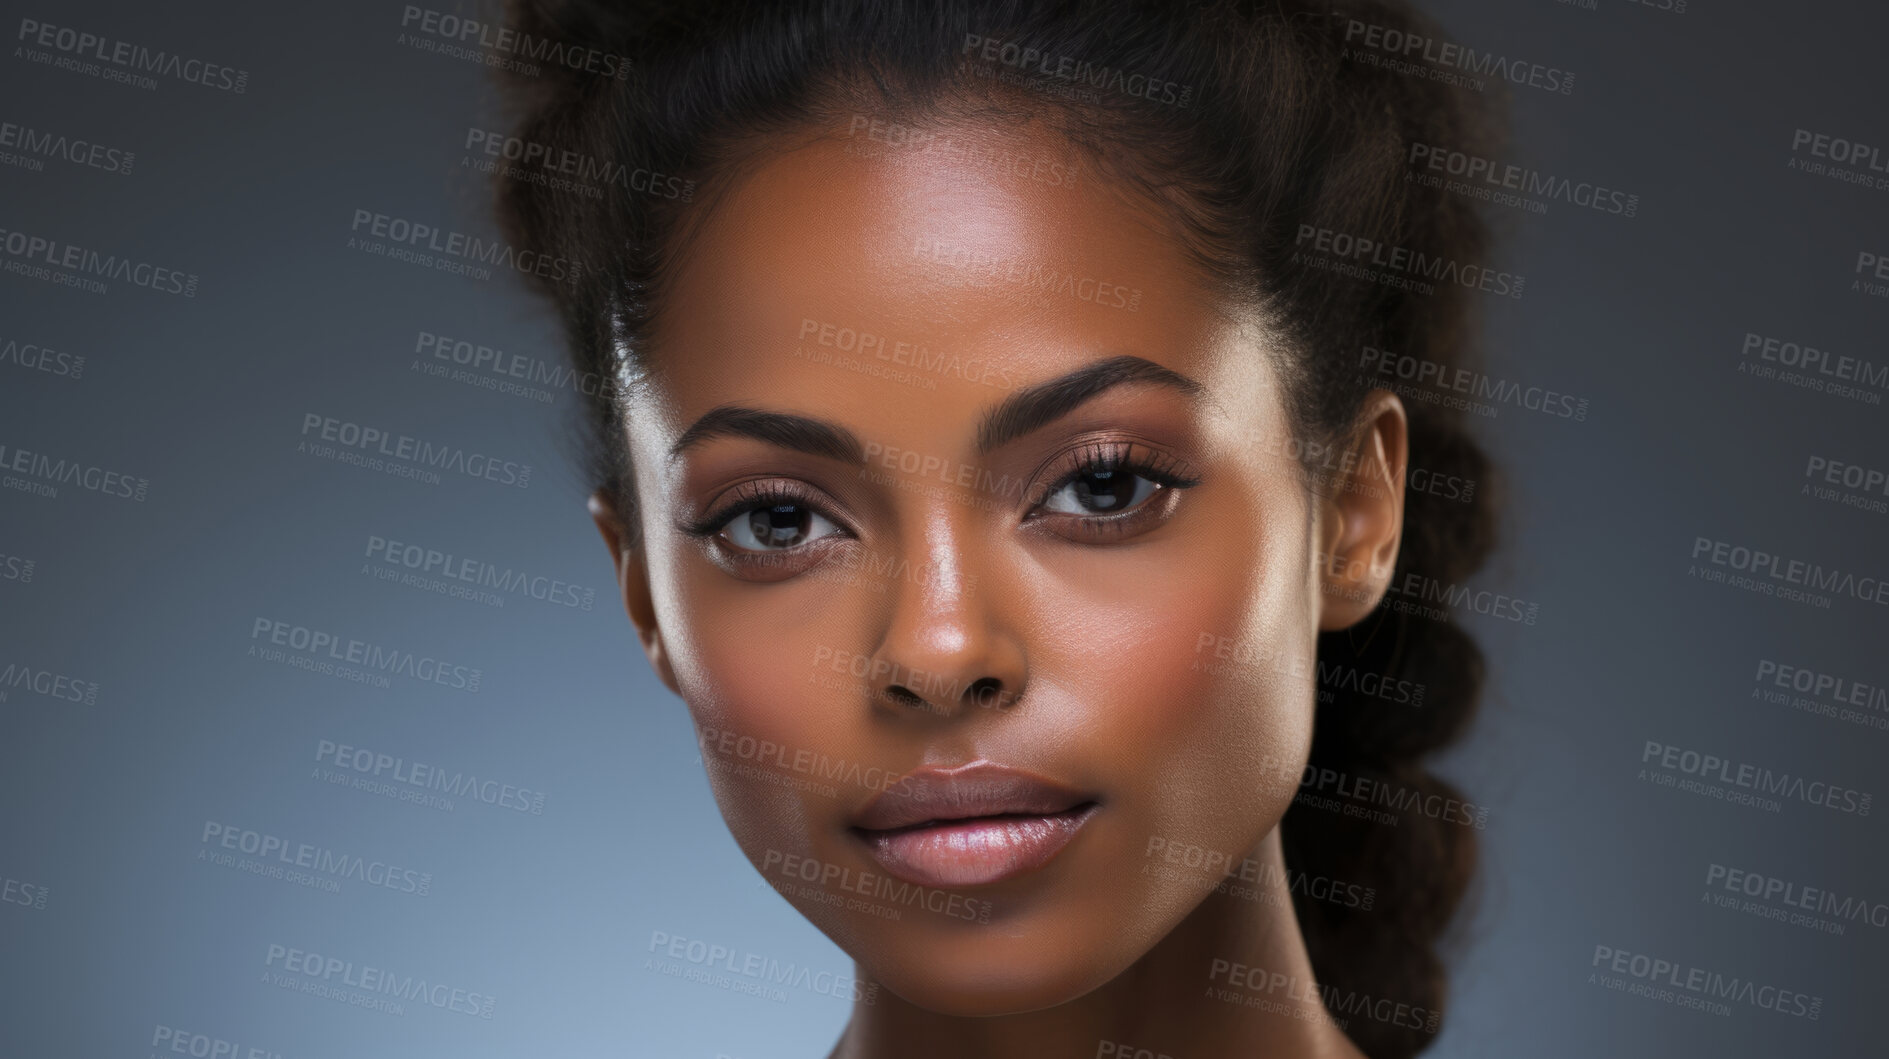 Buy stock photo Close-up of african model. Make-up, smooth skin, curly hair. Fashion, editorial concept.